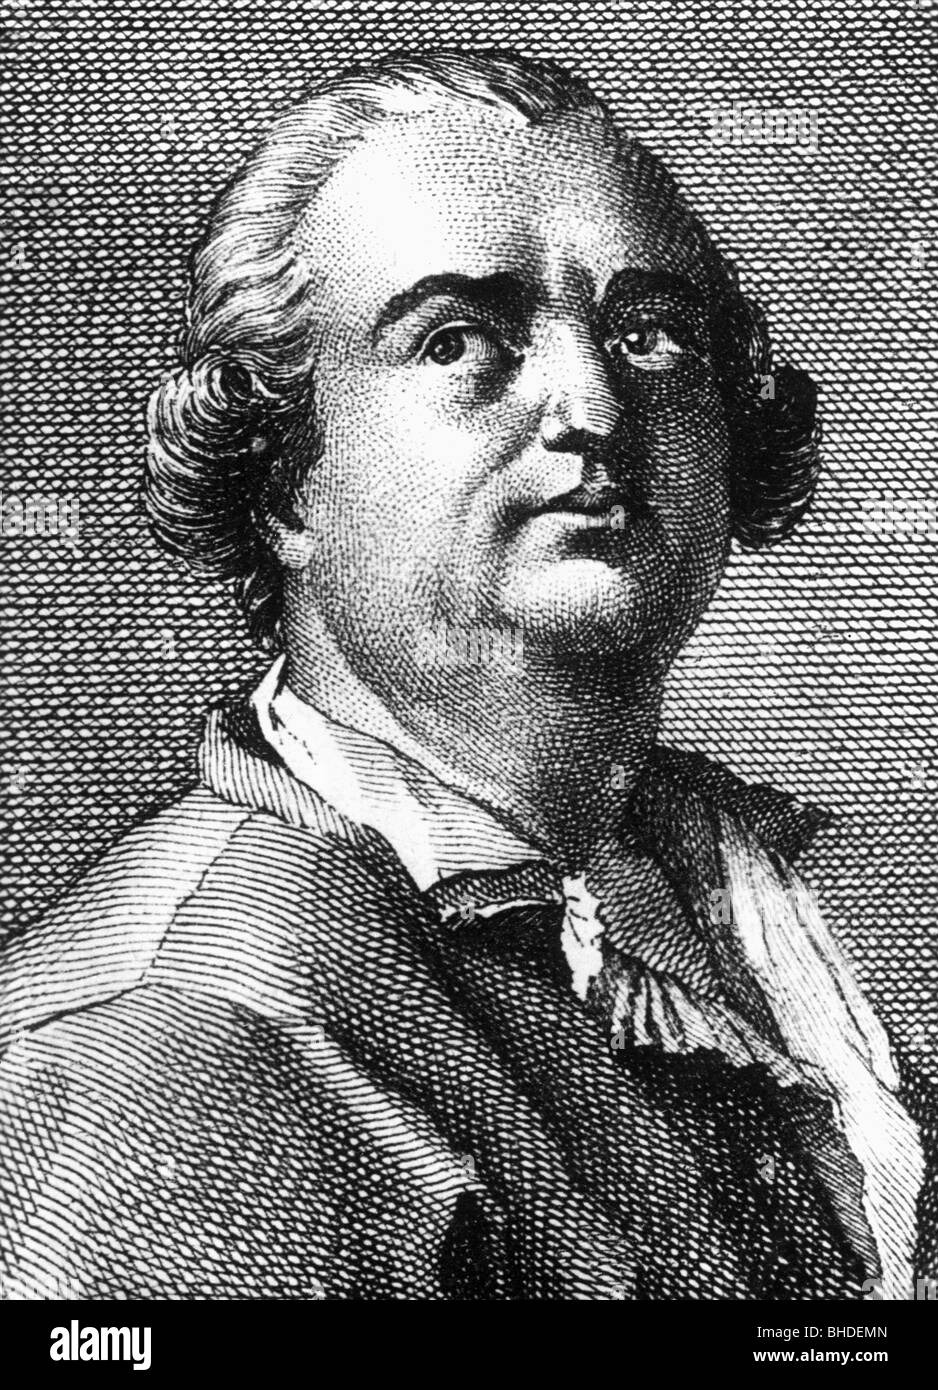 Cagliostro, Count Alessandro, 8.6.1743 - 26.12.1795, Italian adventurer and alchemist, portrait, contemporary copper engraving, detail, Artist's Copyright has not to be cleared Stock Photo